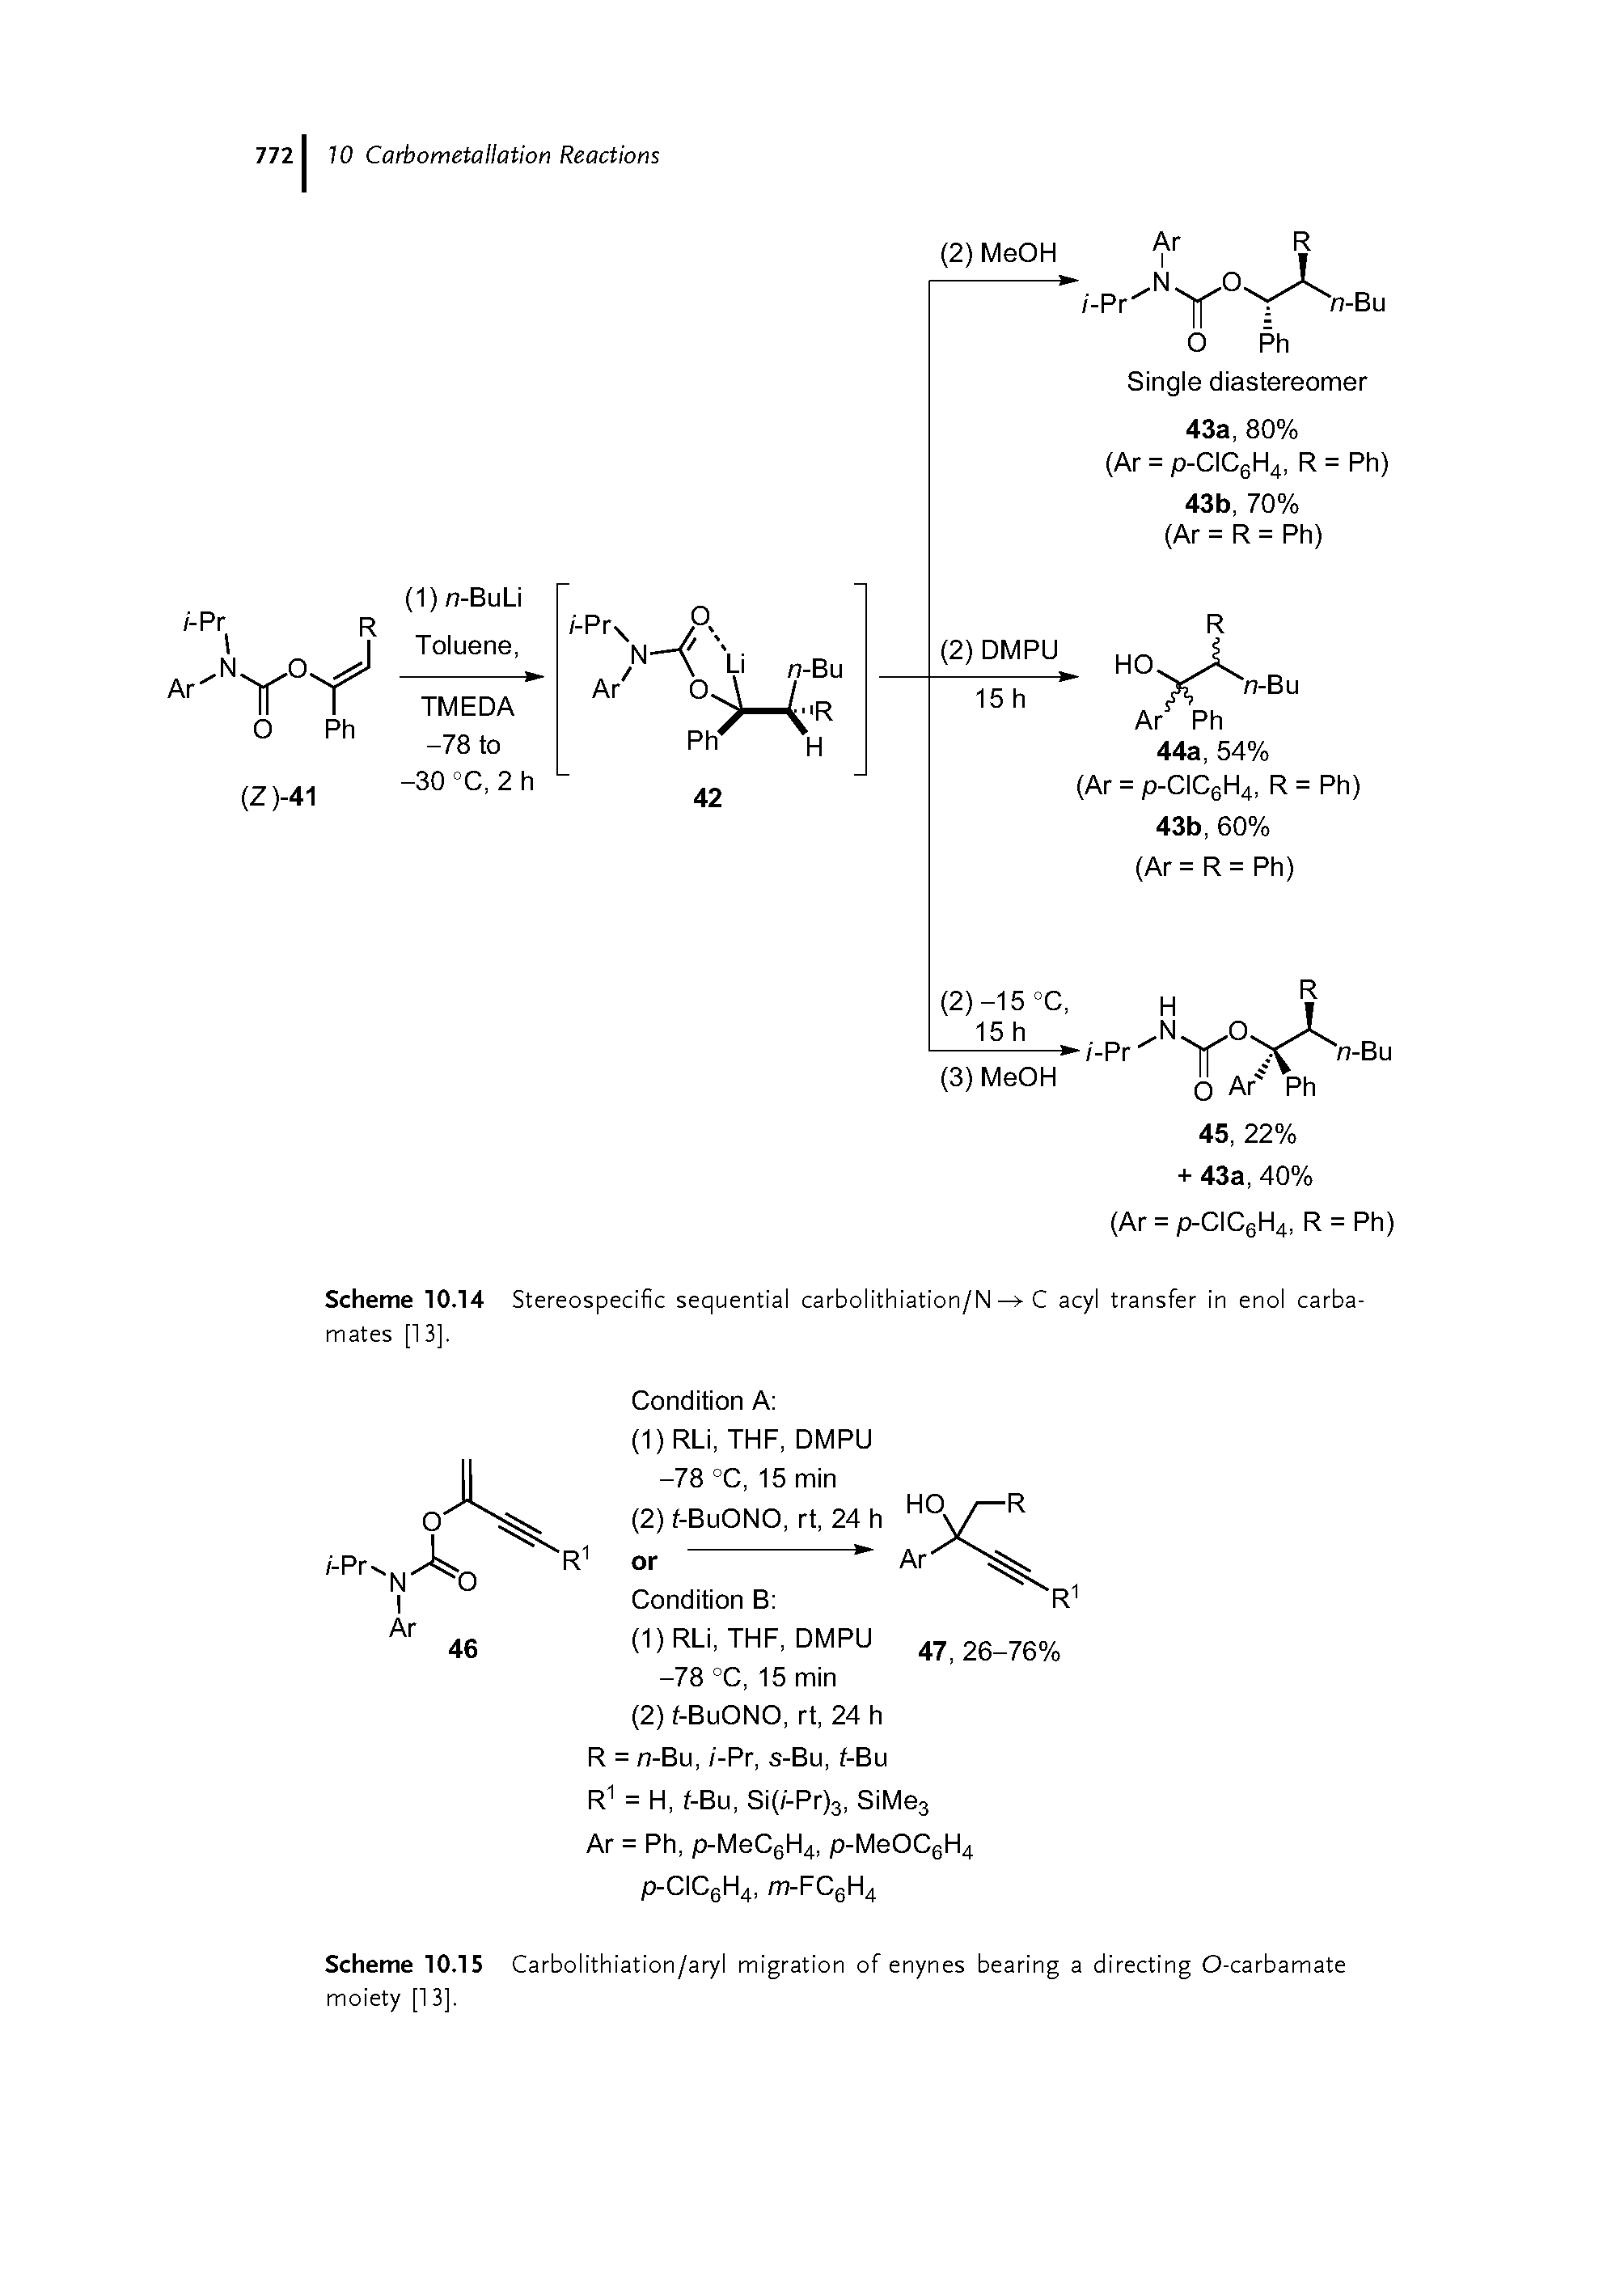 Scheme 10.15 Carbolithiation/aryl migration of enynes bearing a directing O-carbamate moiety [13].